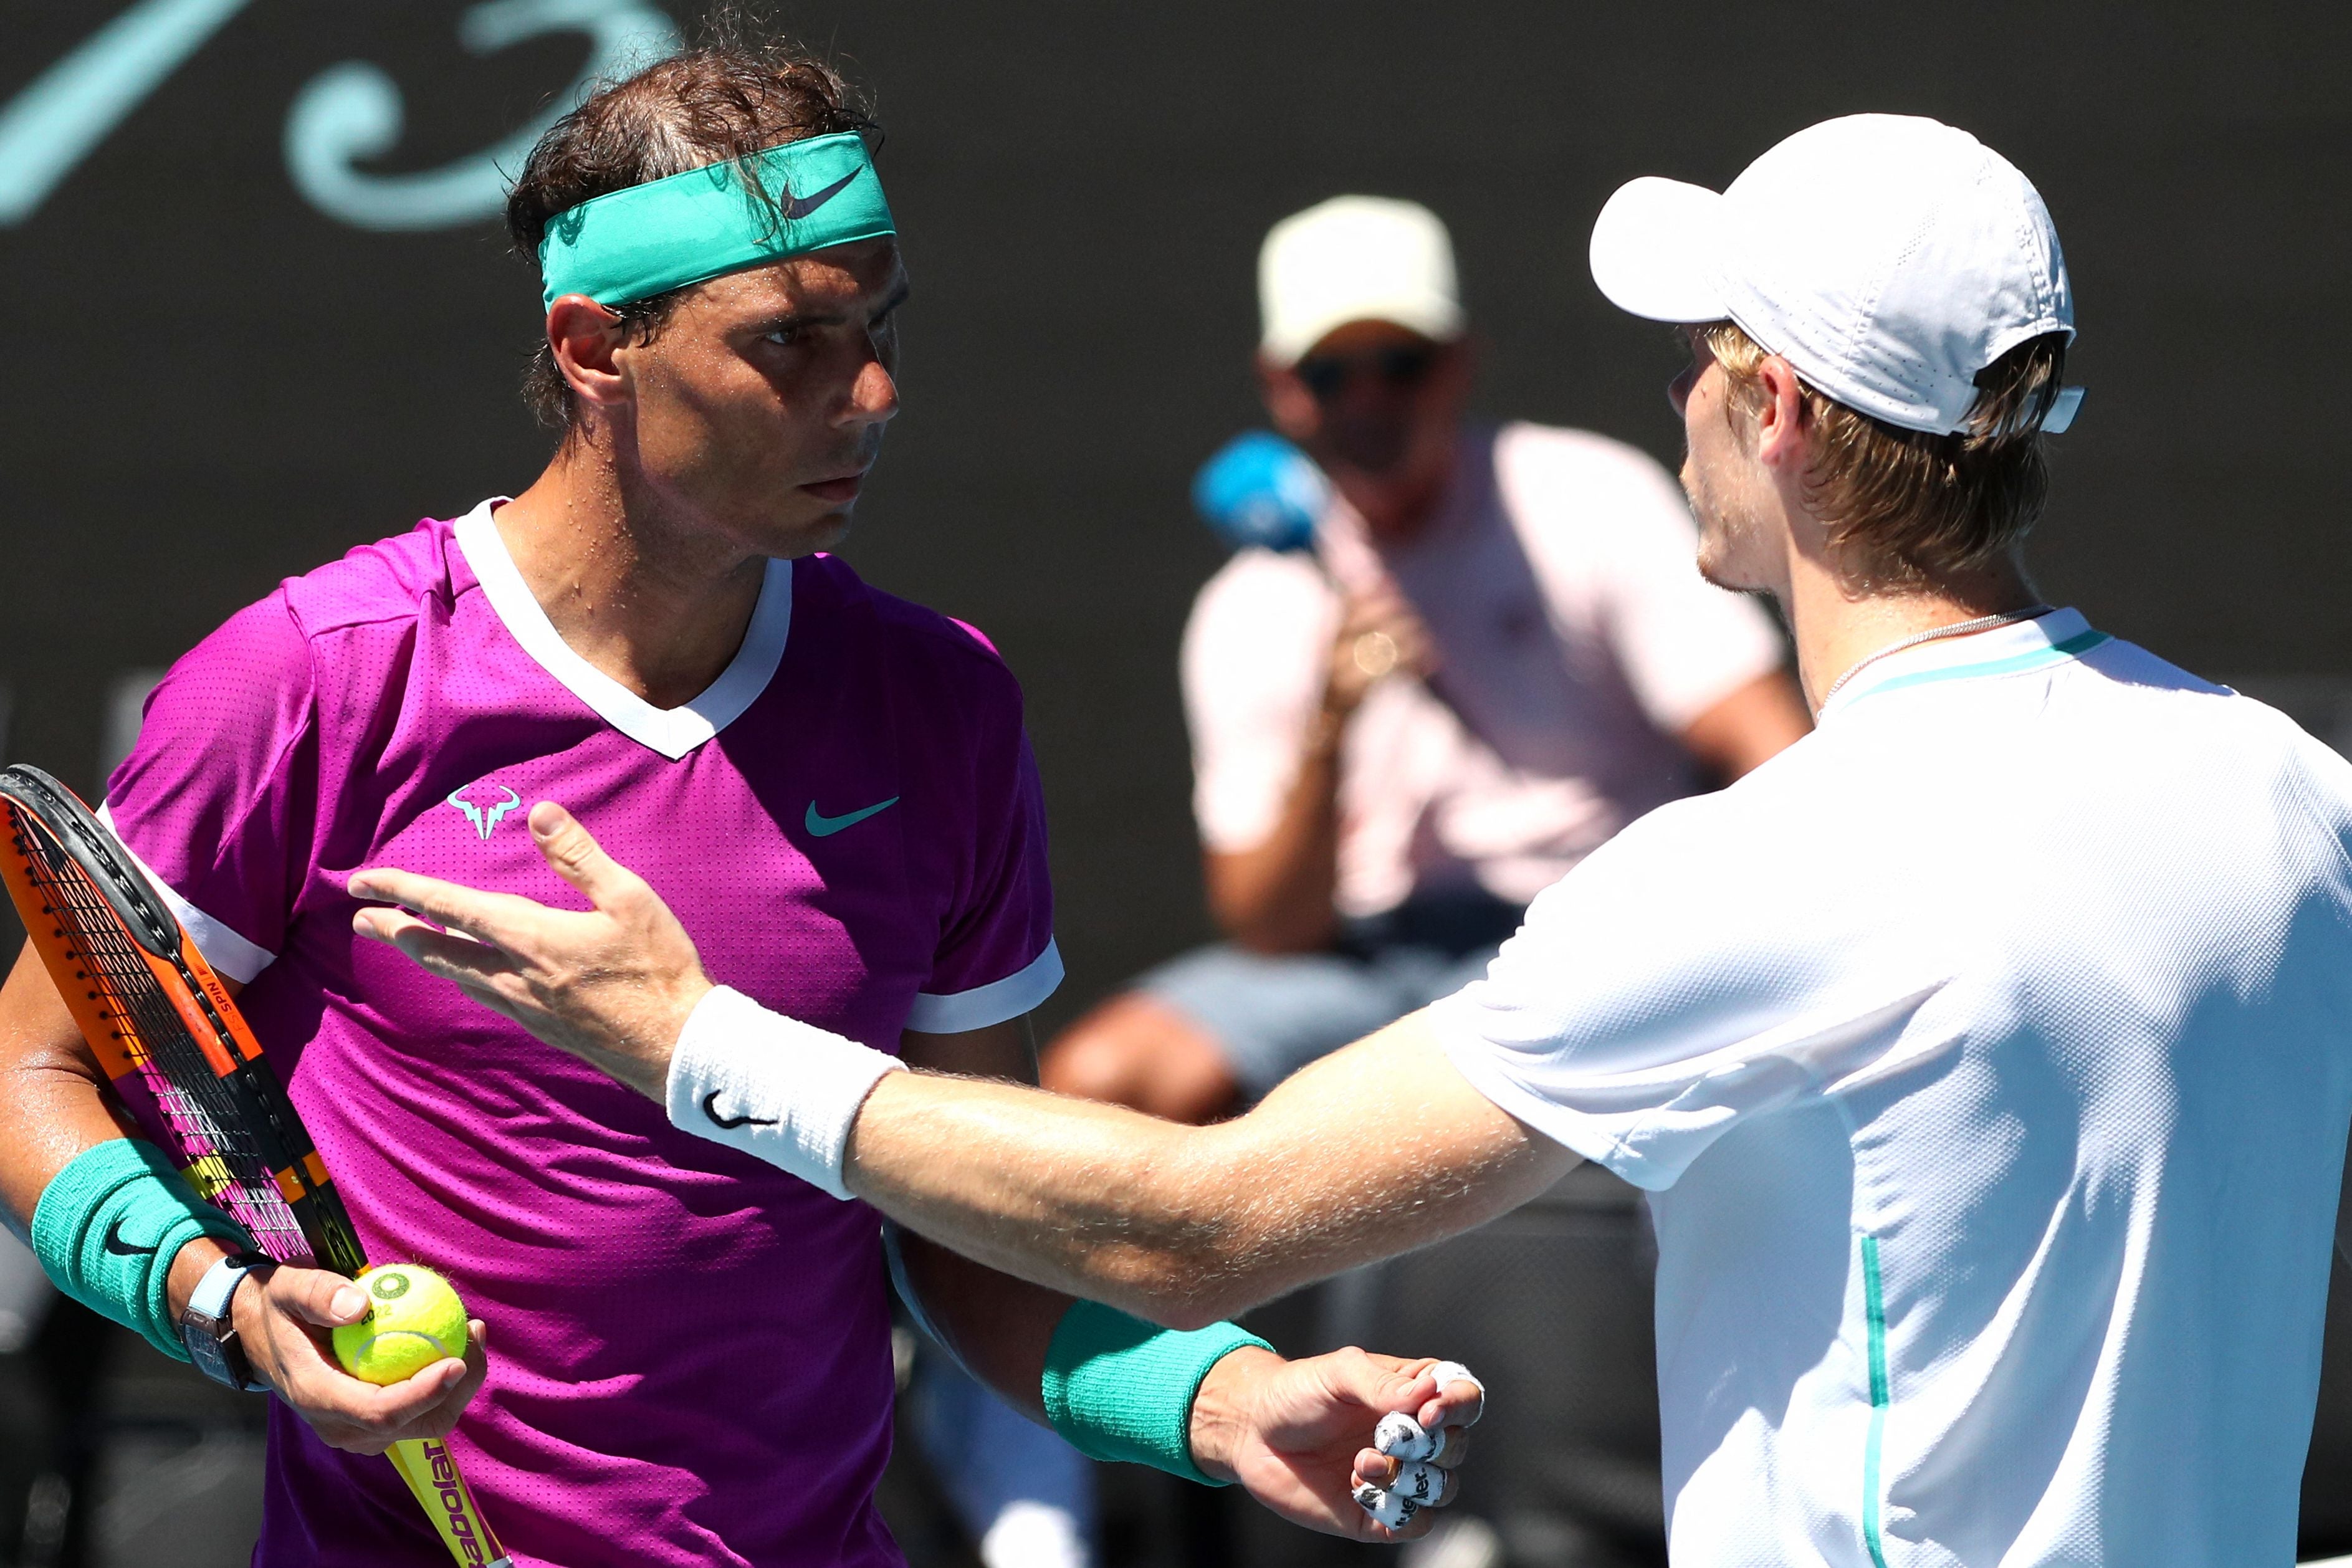 Nadal and Shapovalov clashed in Melbourne